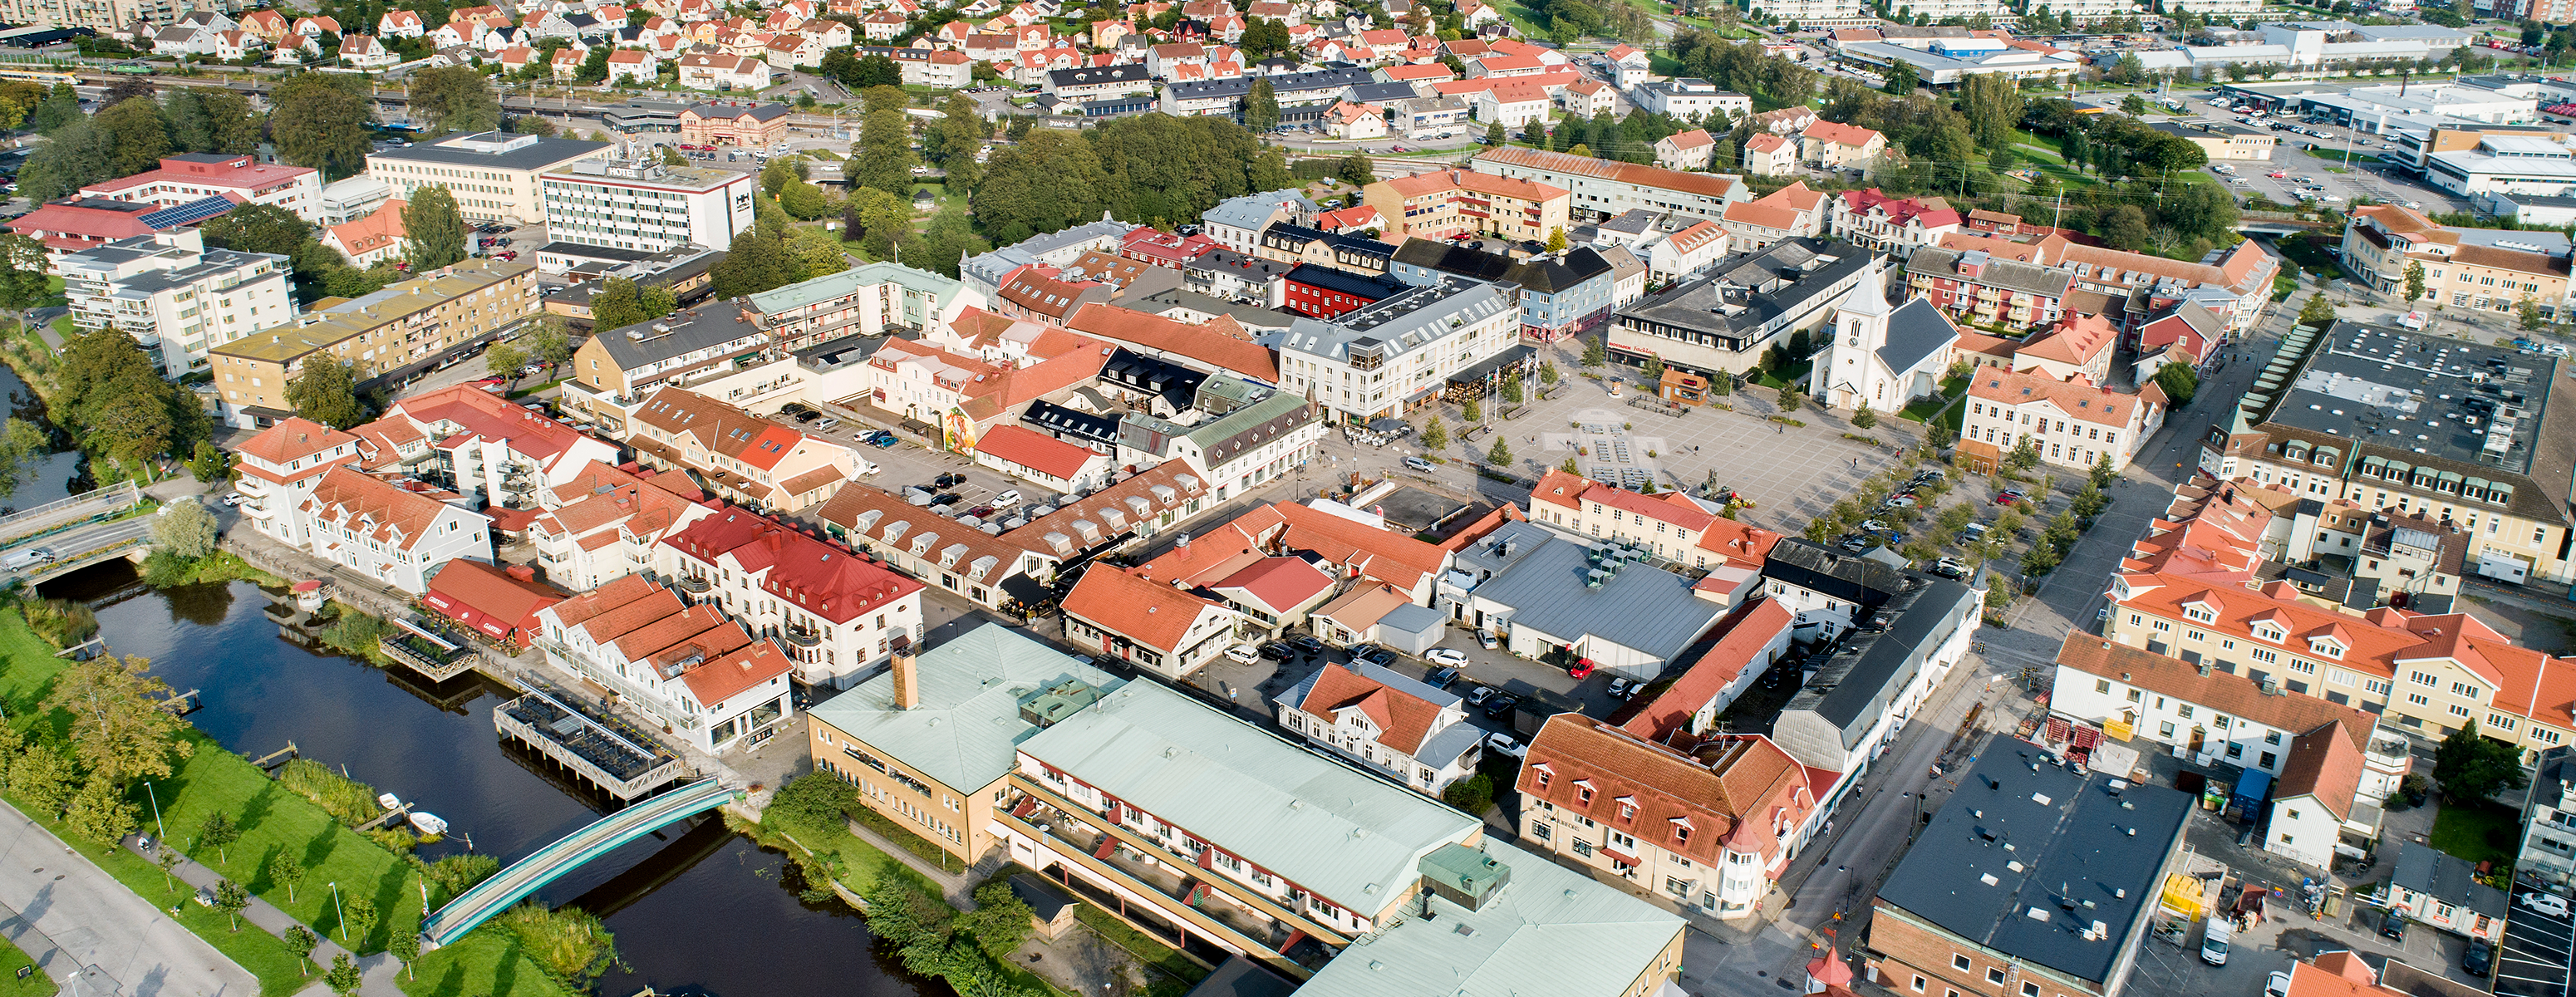 Kungsbacka Municipality chooses Frends as its new integration platform